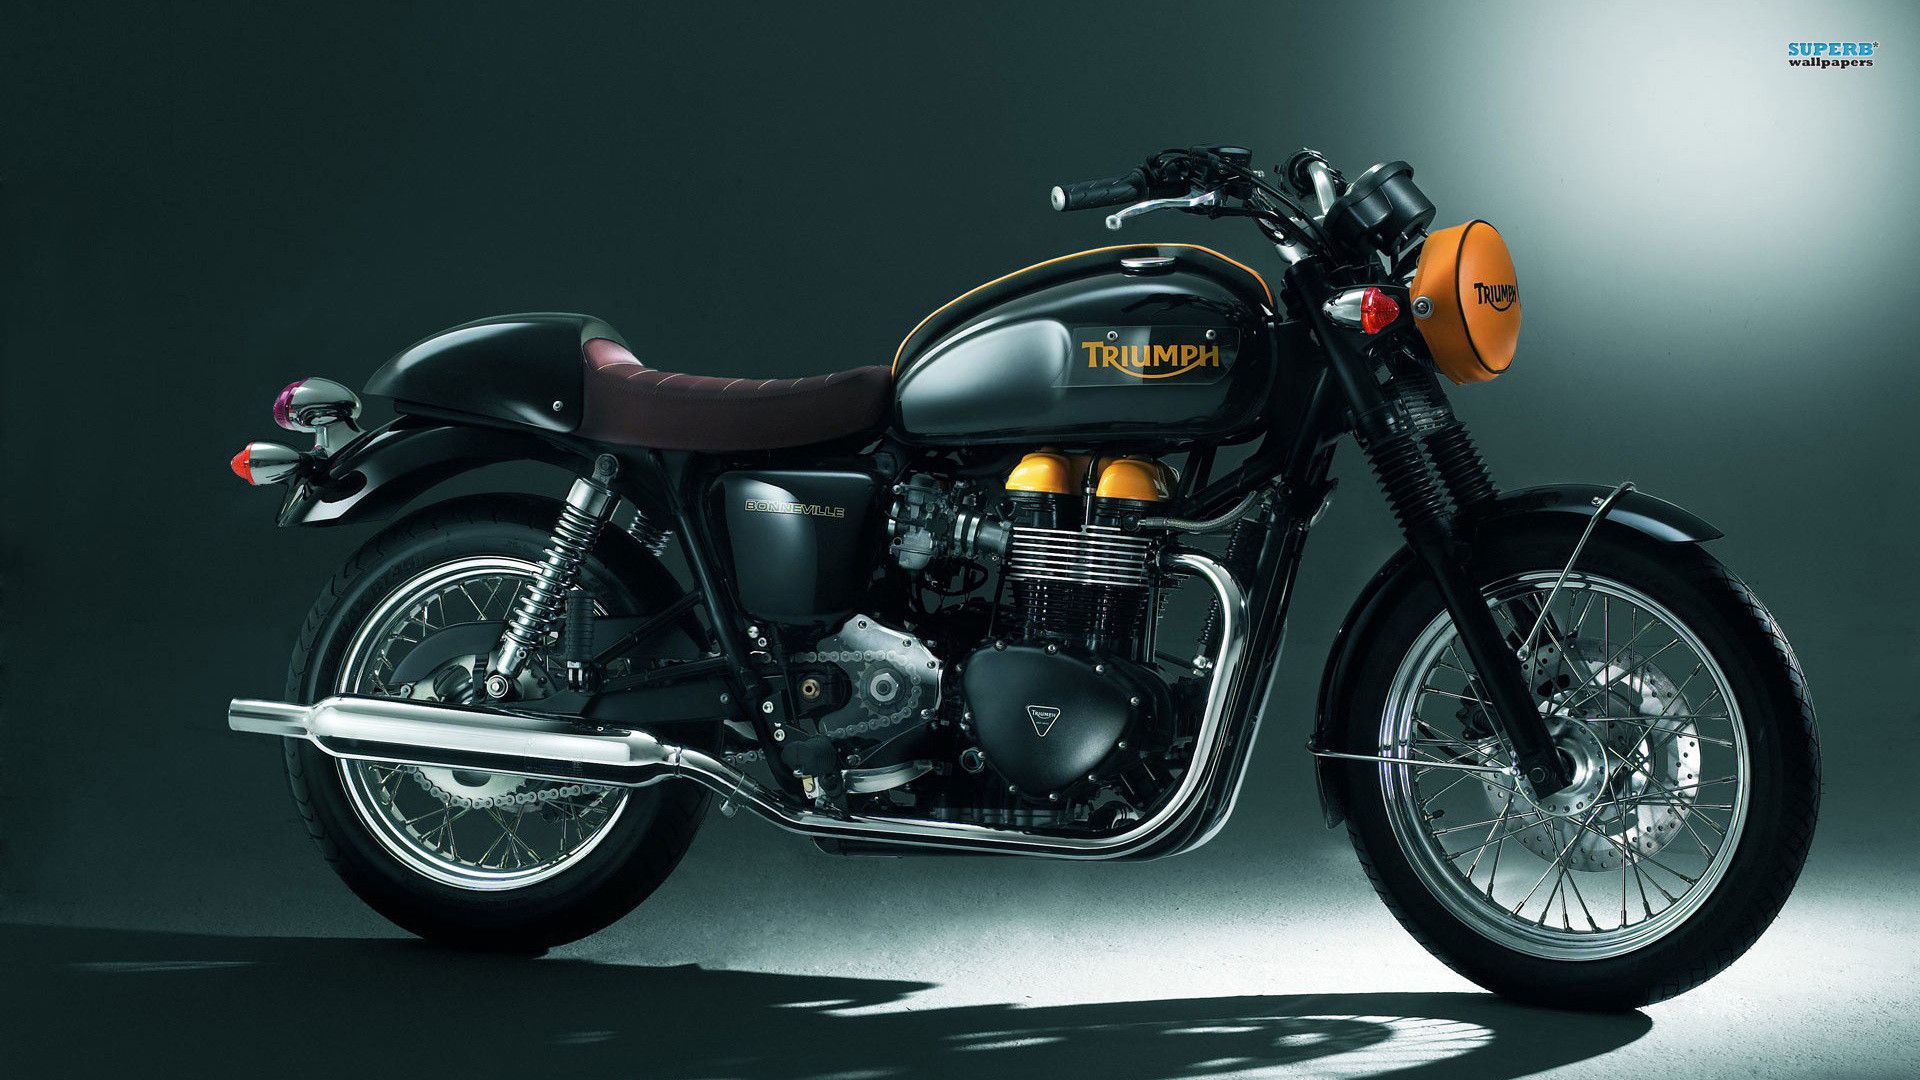 Triumph Motorcycle Wallpapers - Wallpaper Cave